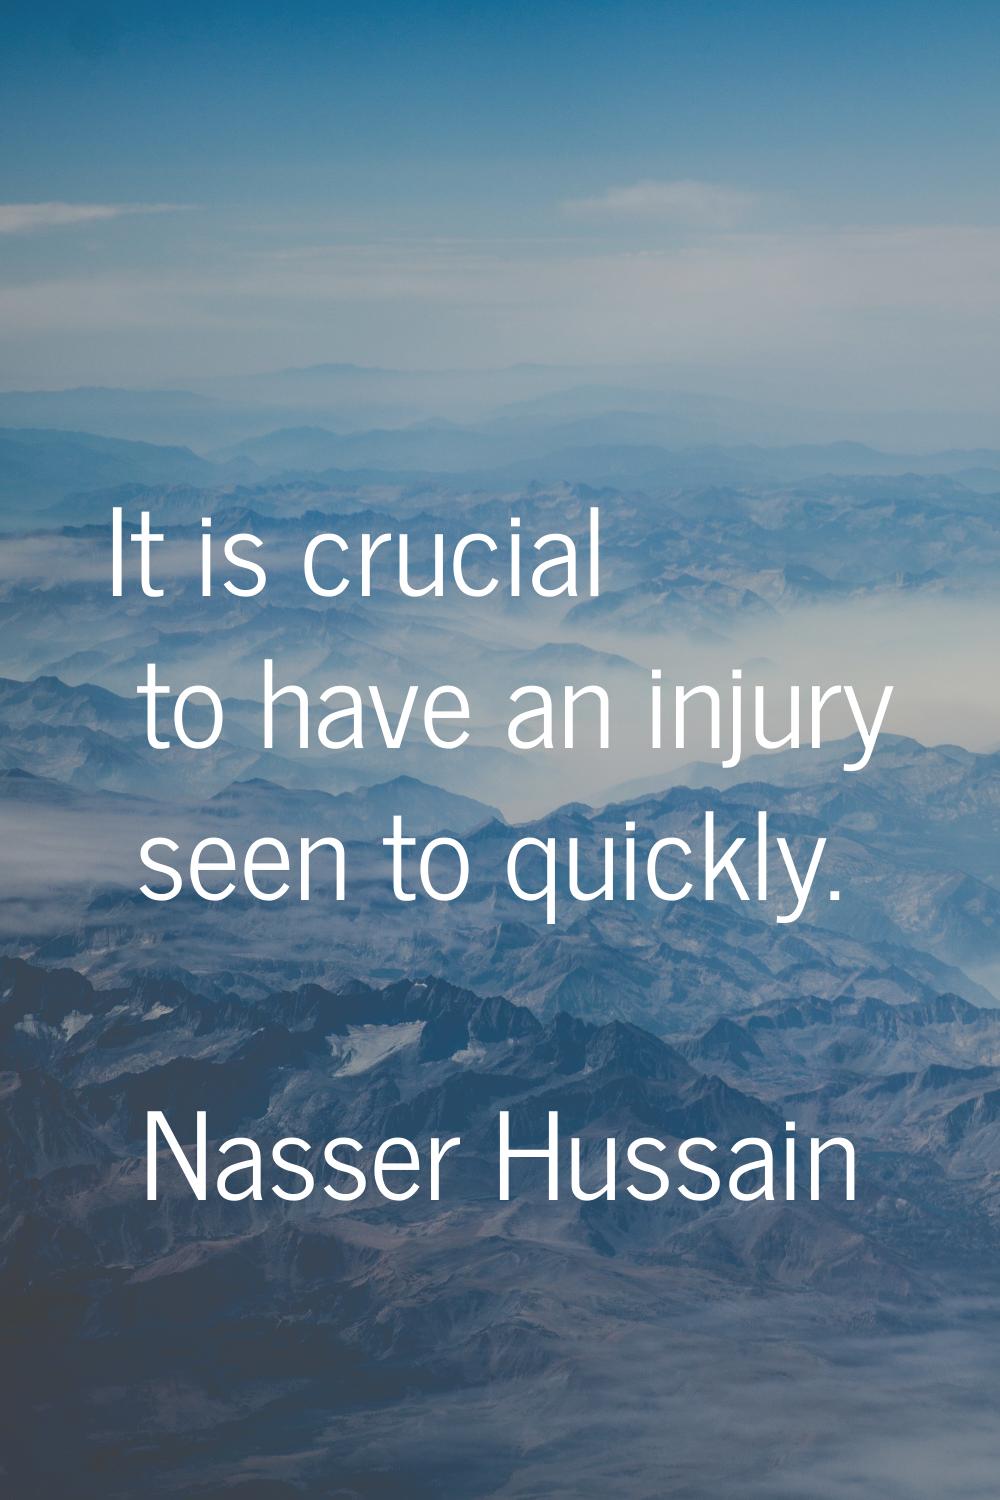 It is crucial to have an injury seen to quickly.